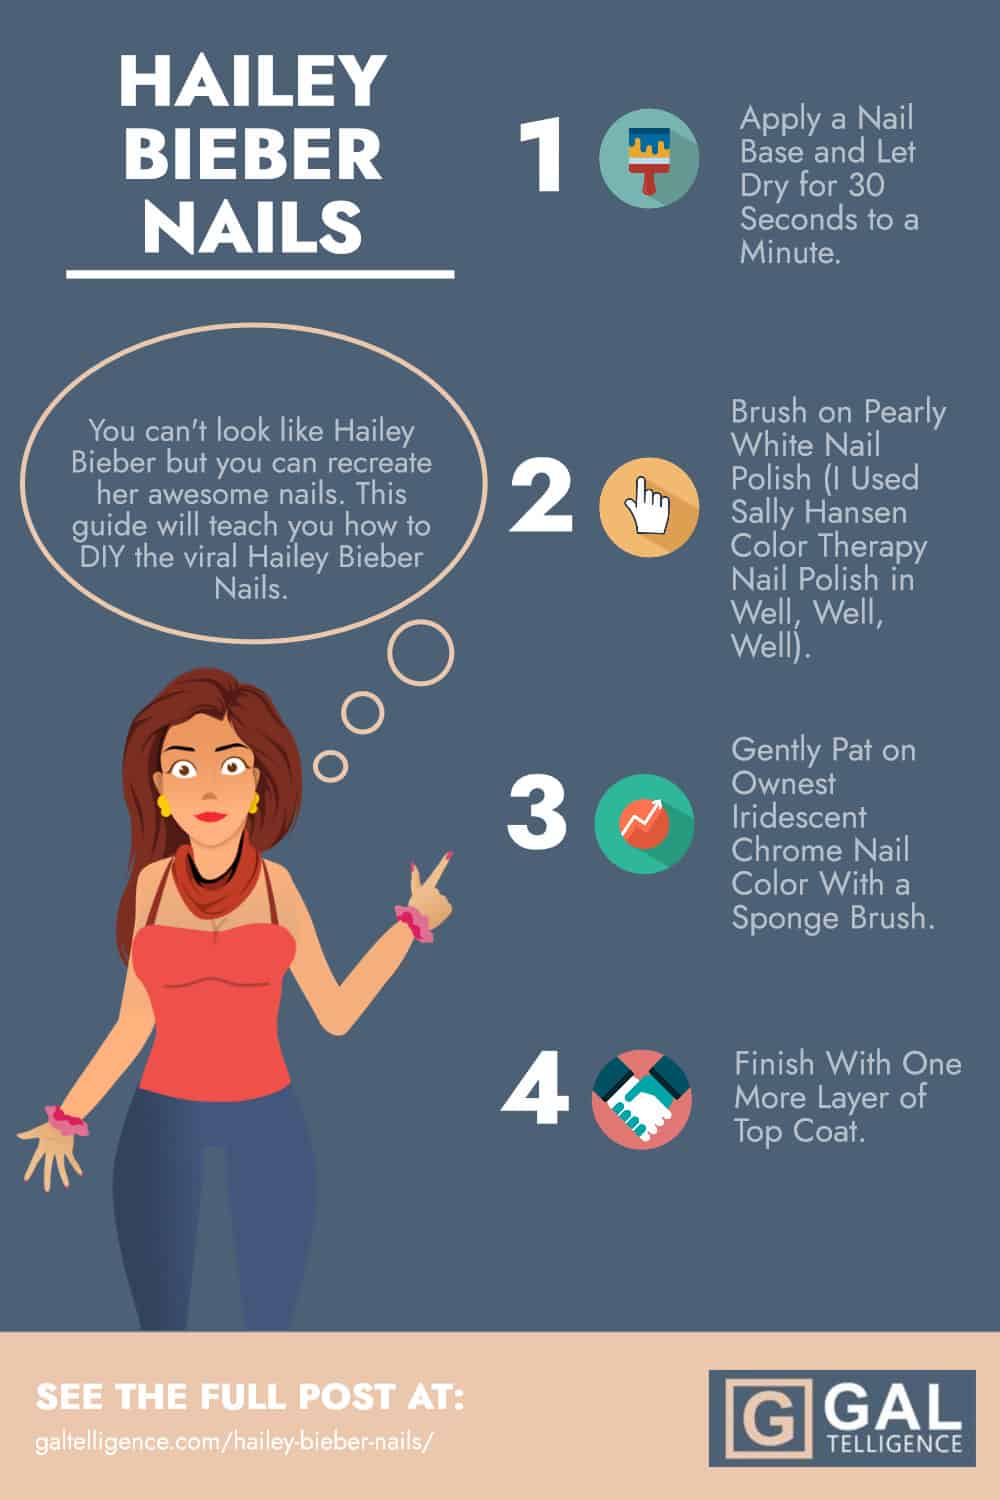 Hailey Bieber Nails - Infographic